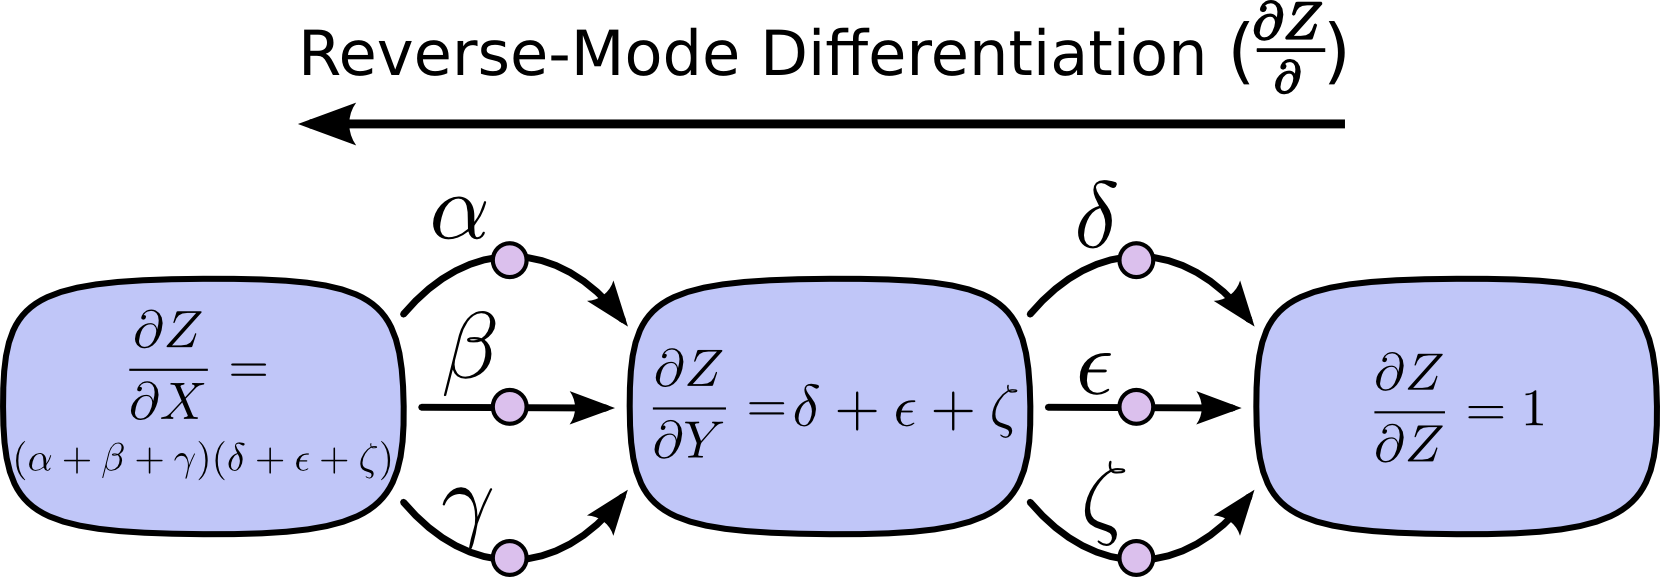 the reverse-mode differentiation